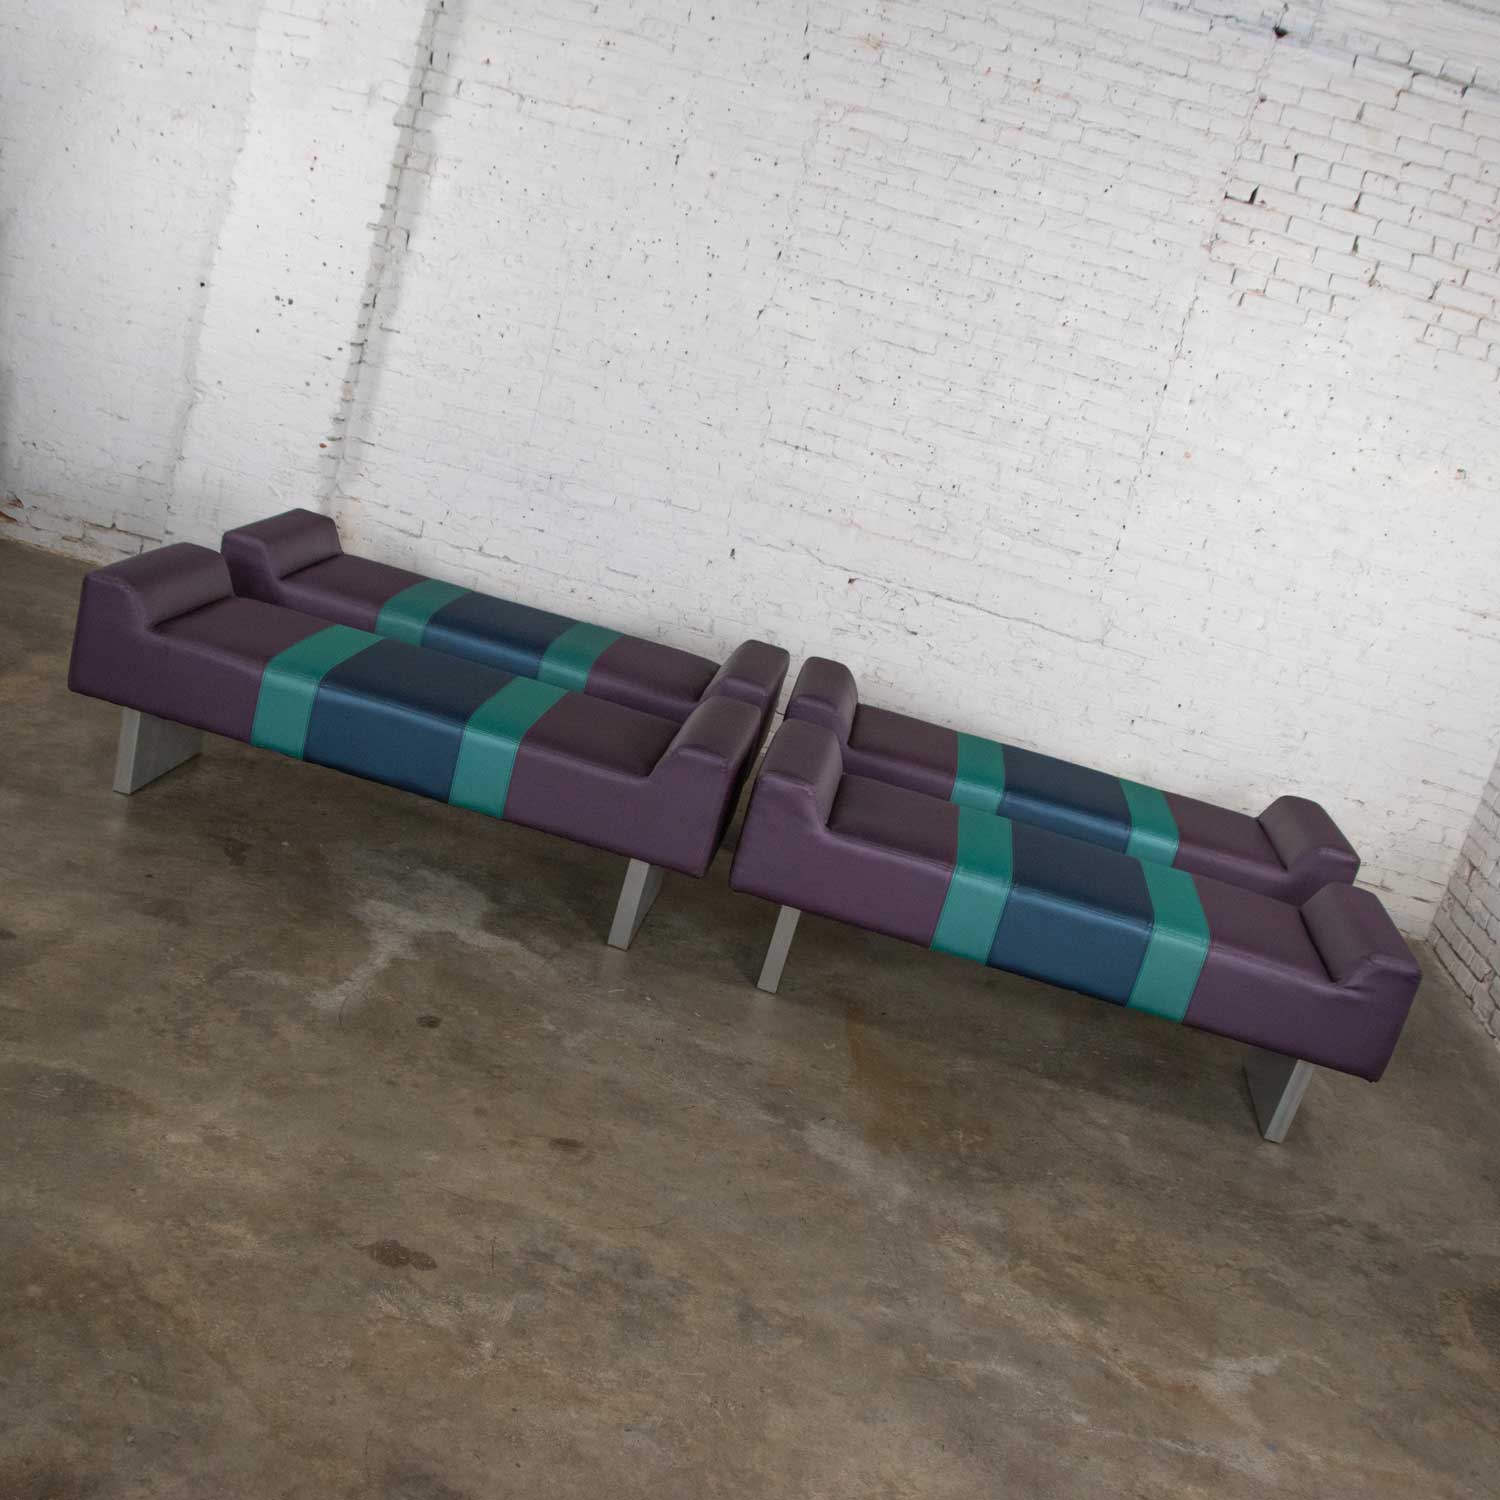 Postmodern Bench Purple Vinyl & Brushed Aluminum Bases After the Memphis Group